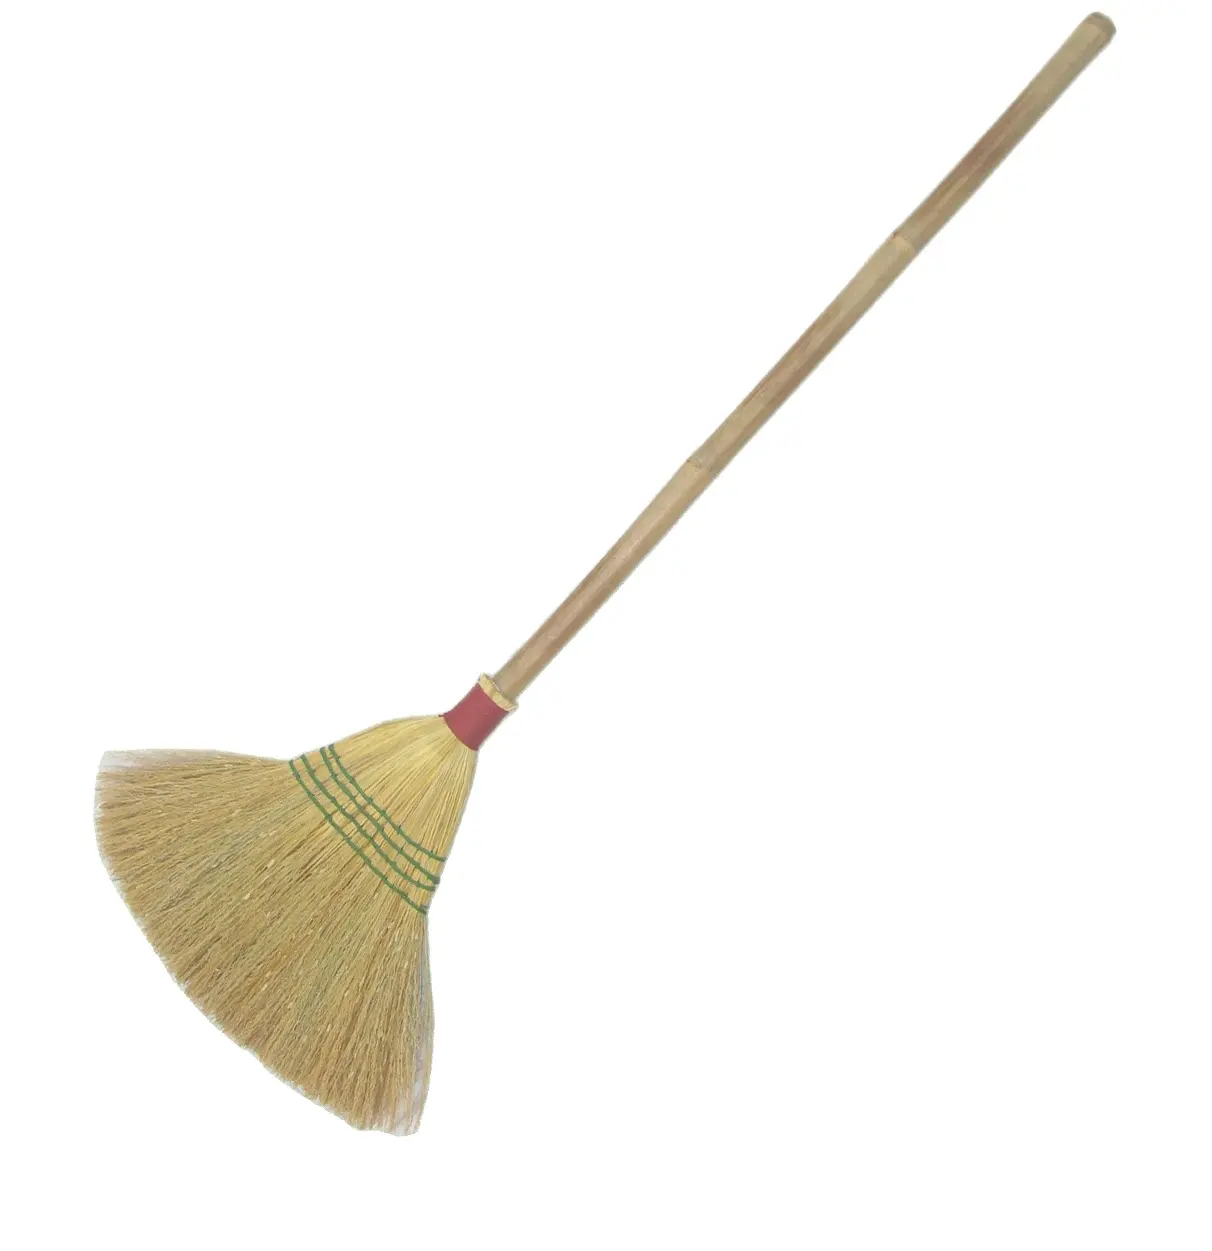 Small rice straw broom good quality with rattan handle for home floor sweepers